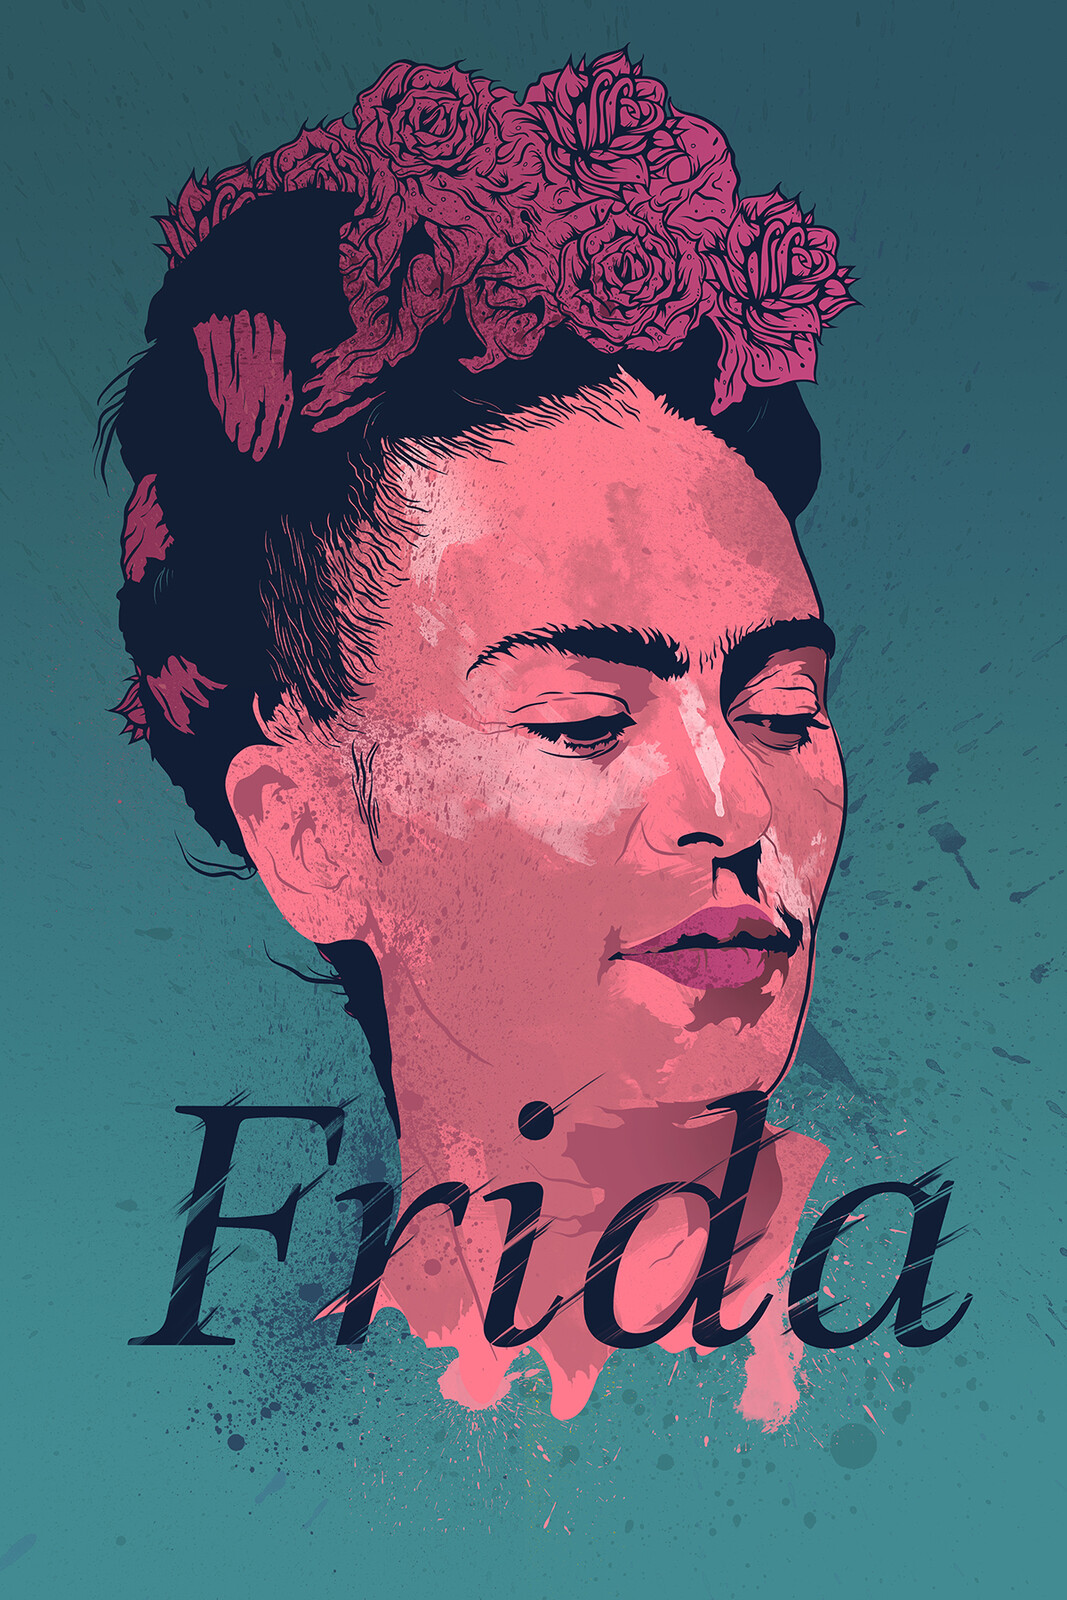 Frida Kahlo, best known for her self-portraits, her work has been celebrated in Mexico as emblematic of national and indigenous tradition and by feminists for its uncompromising depiction of the female experience and form. 